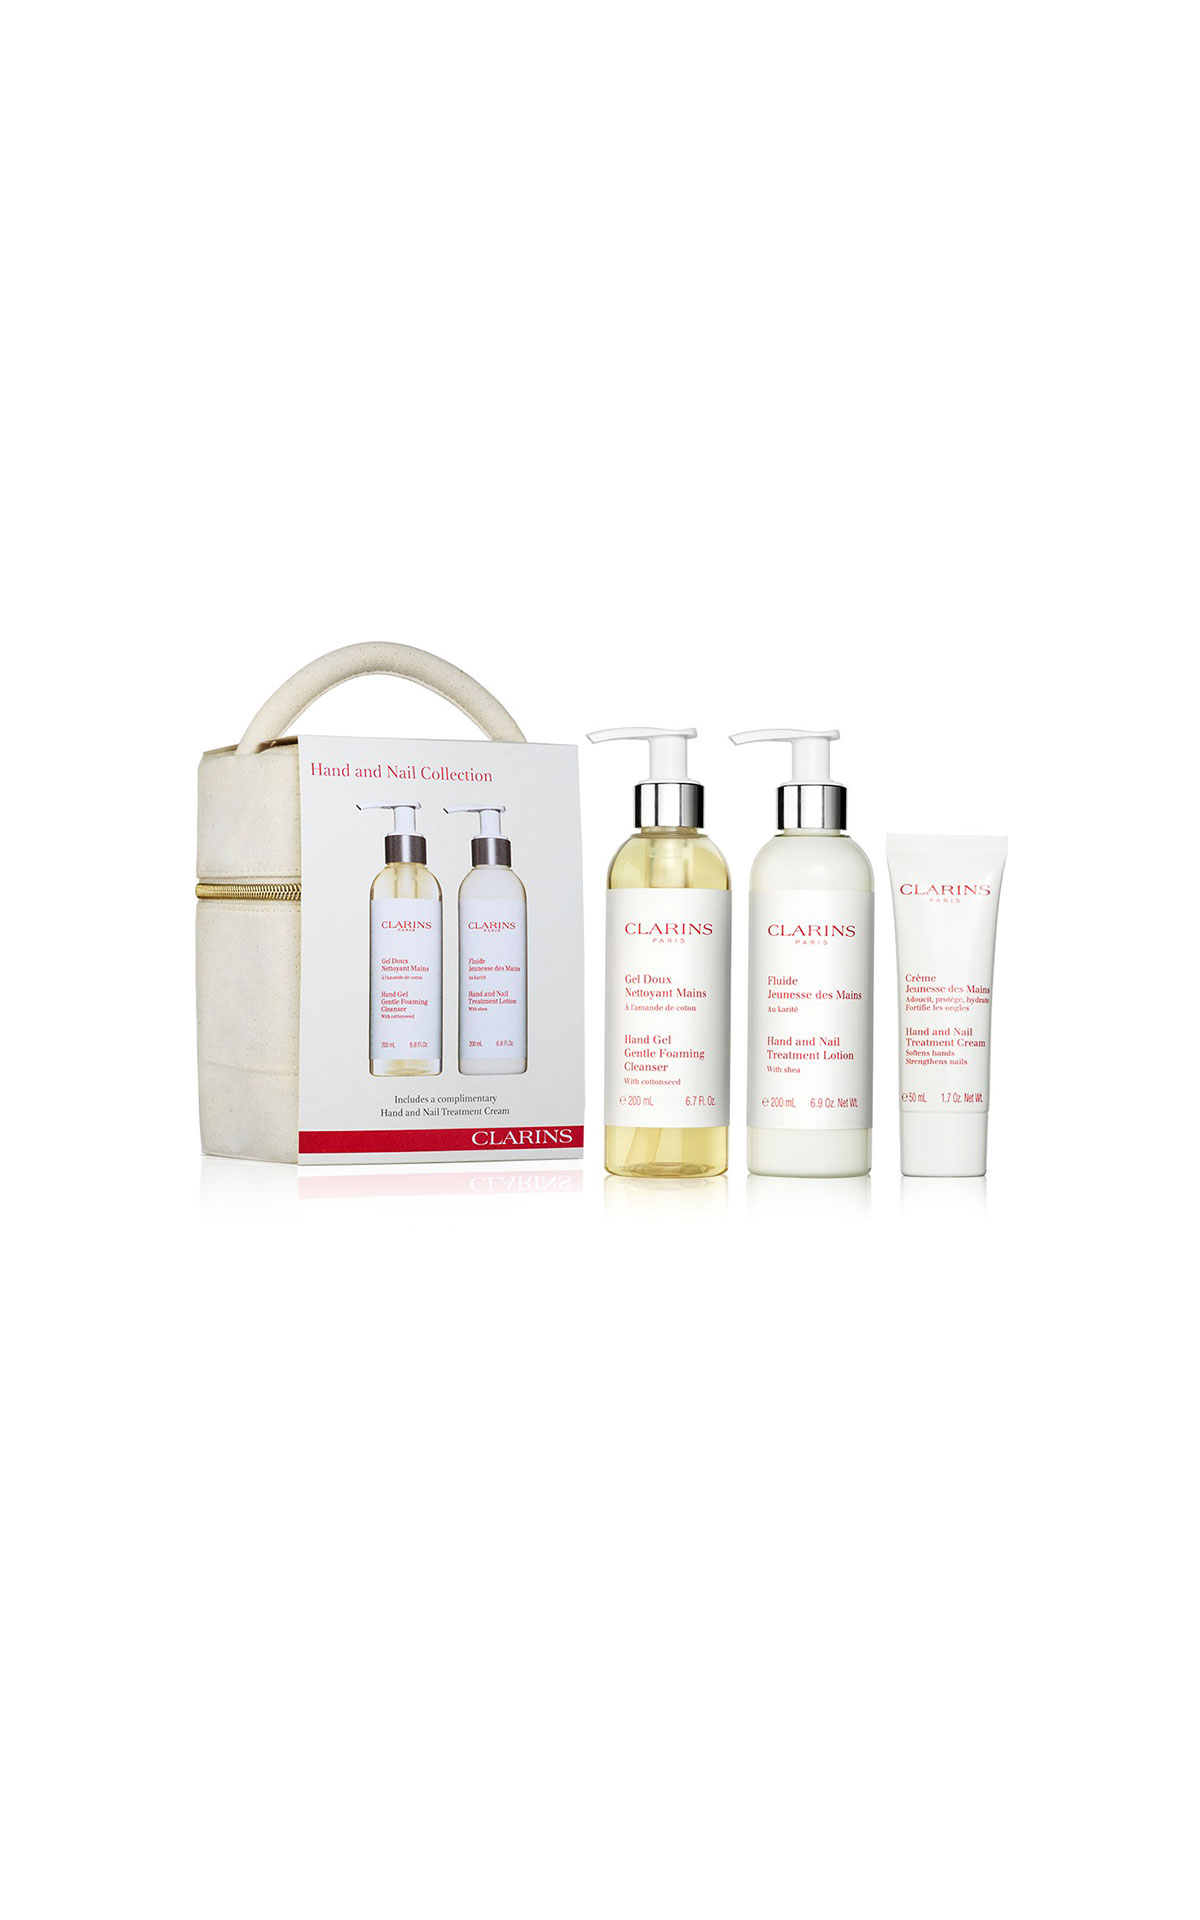 Clarins Hand and nail collection from Bicester Village